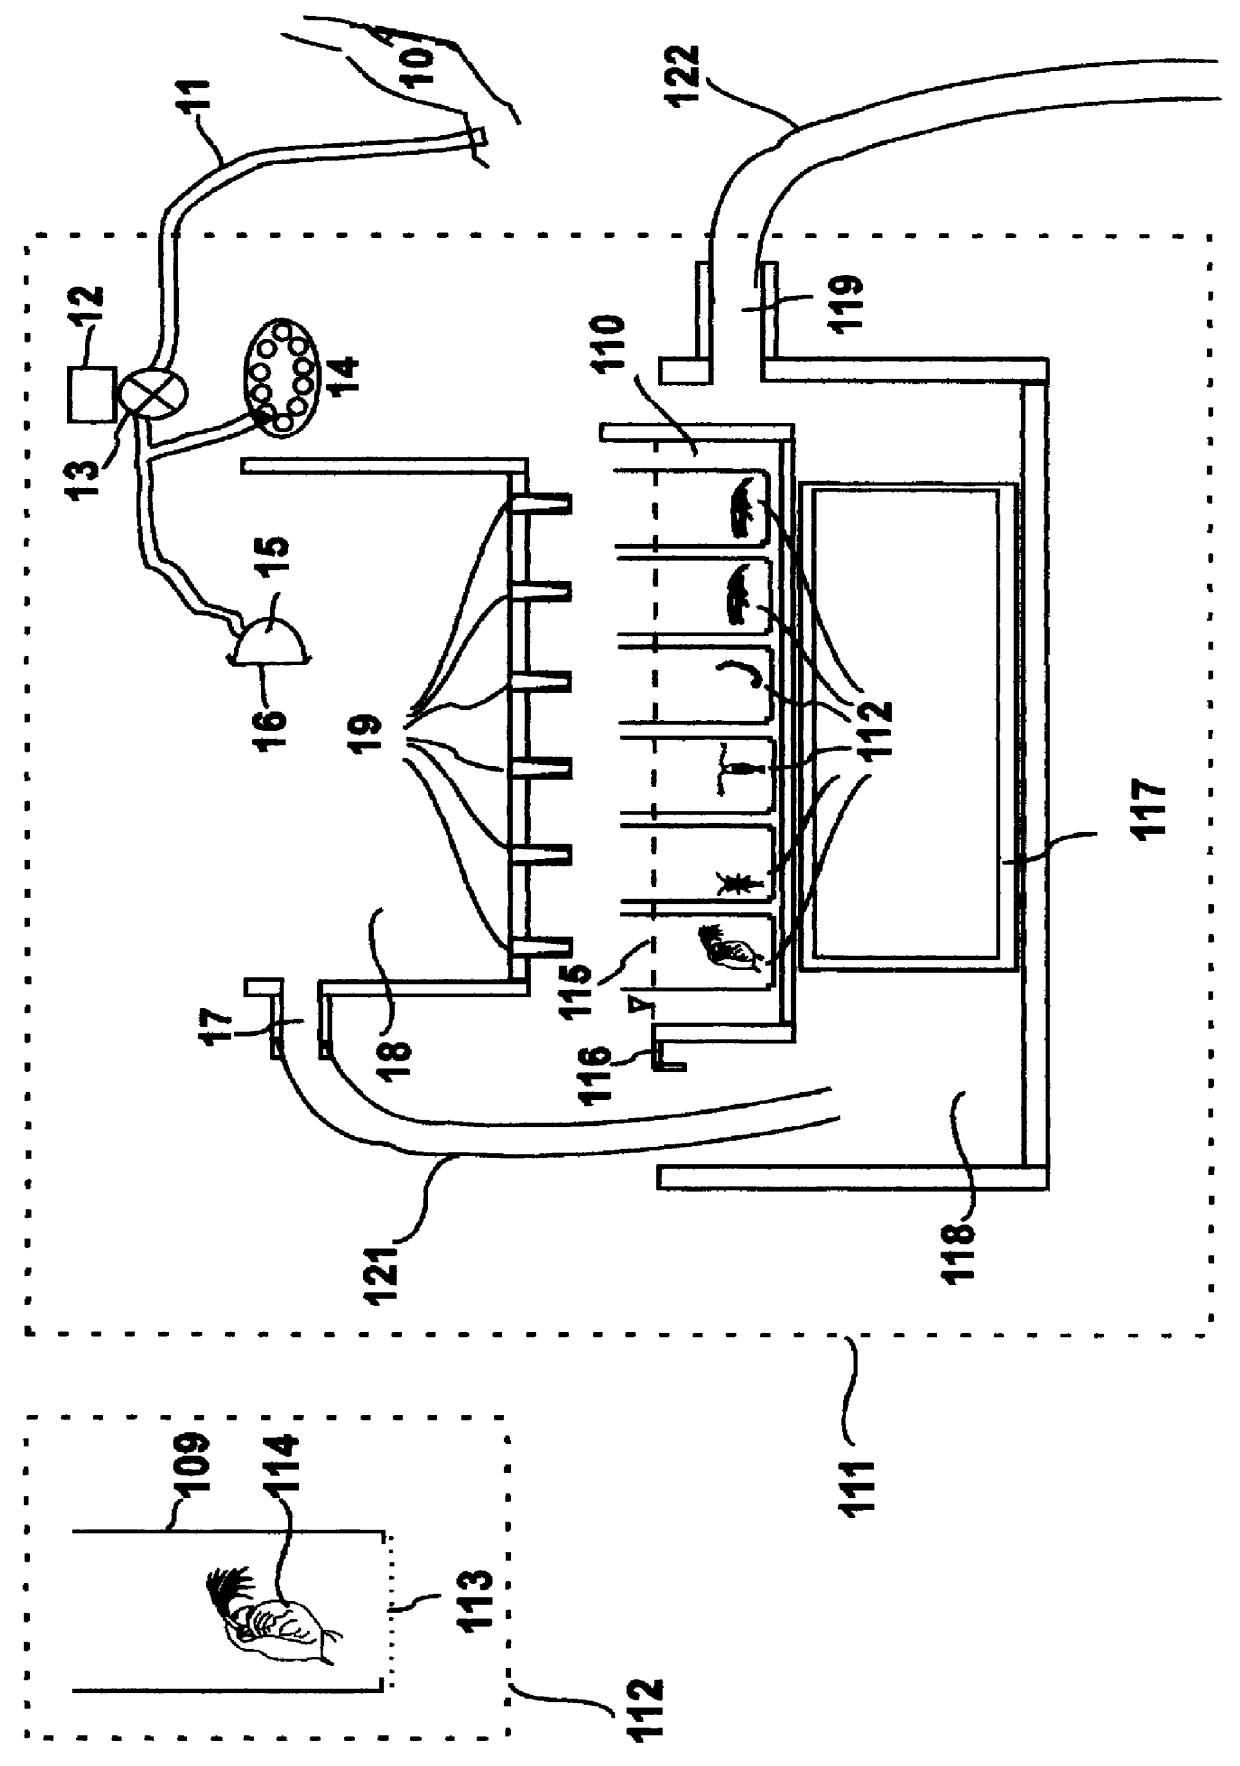 Flow-through system and method for toxicity testing